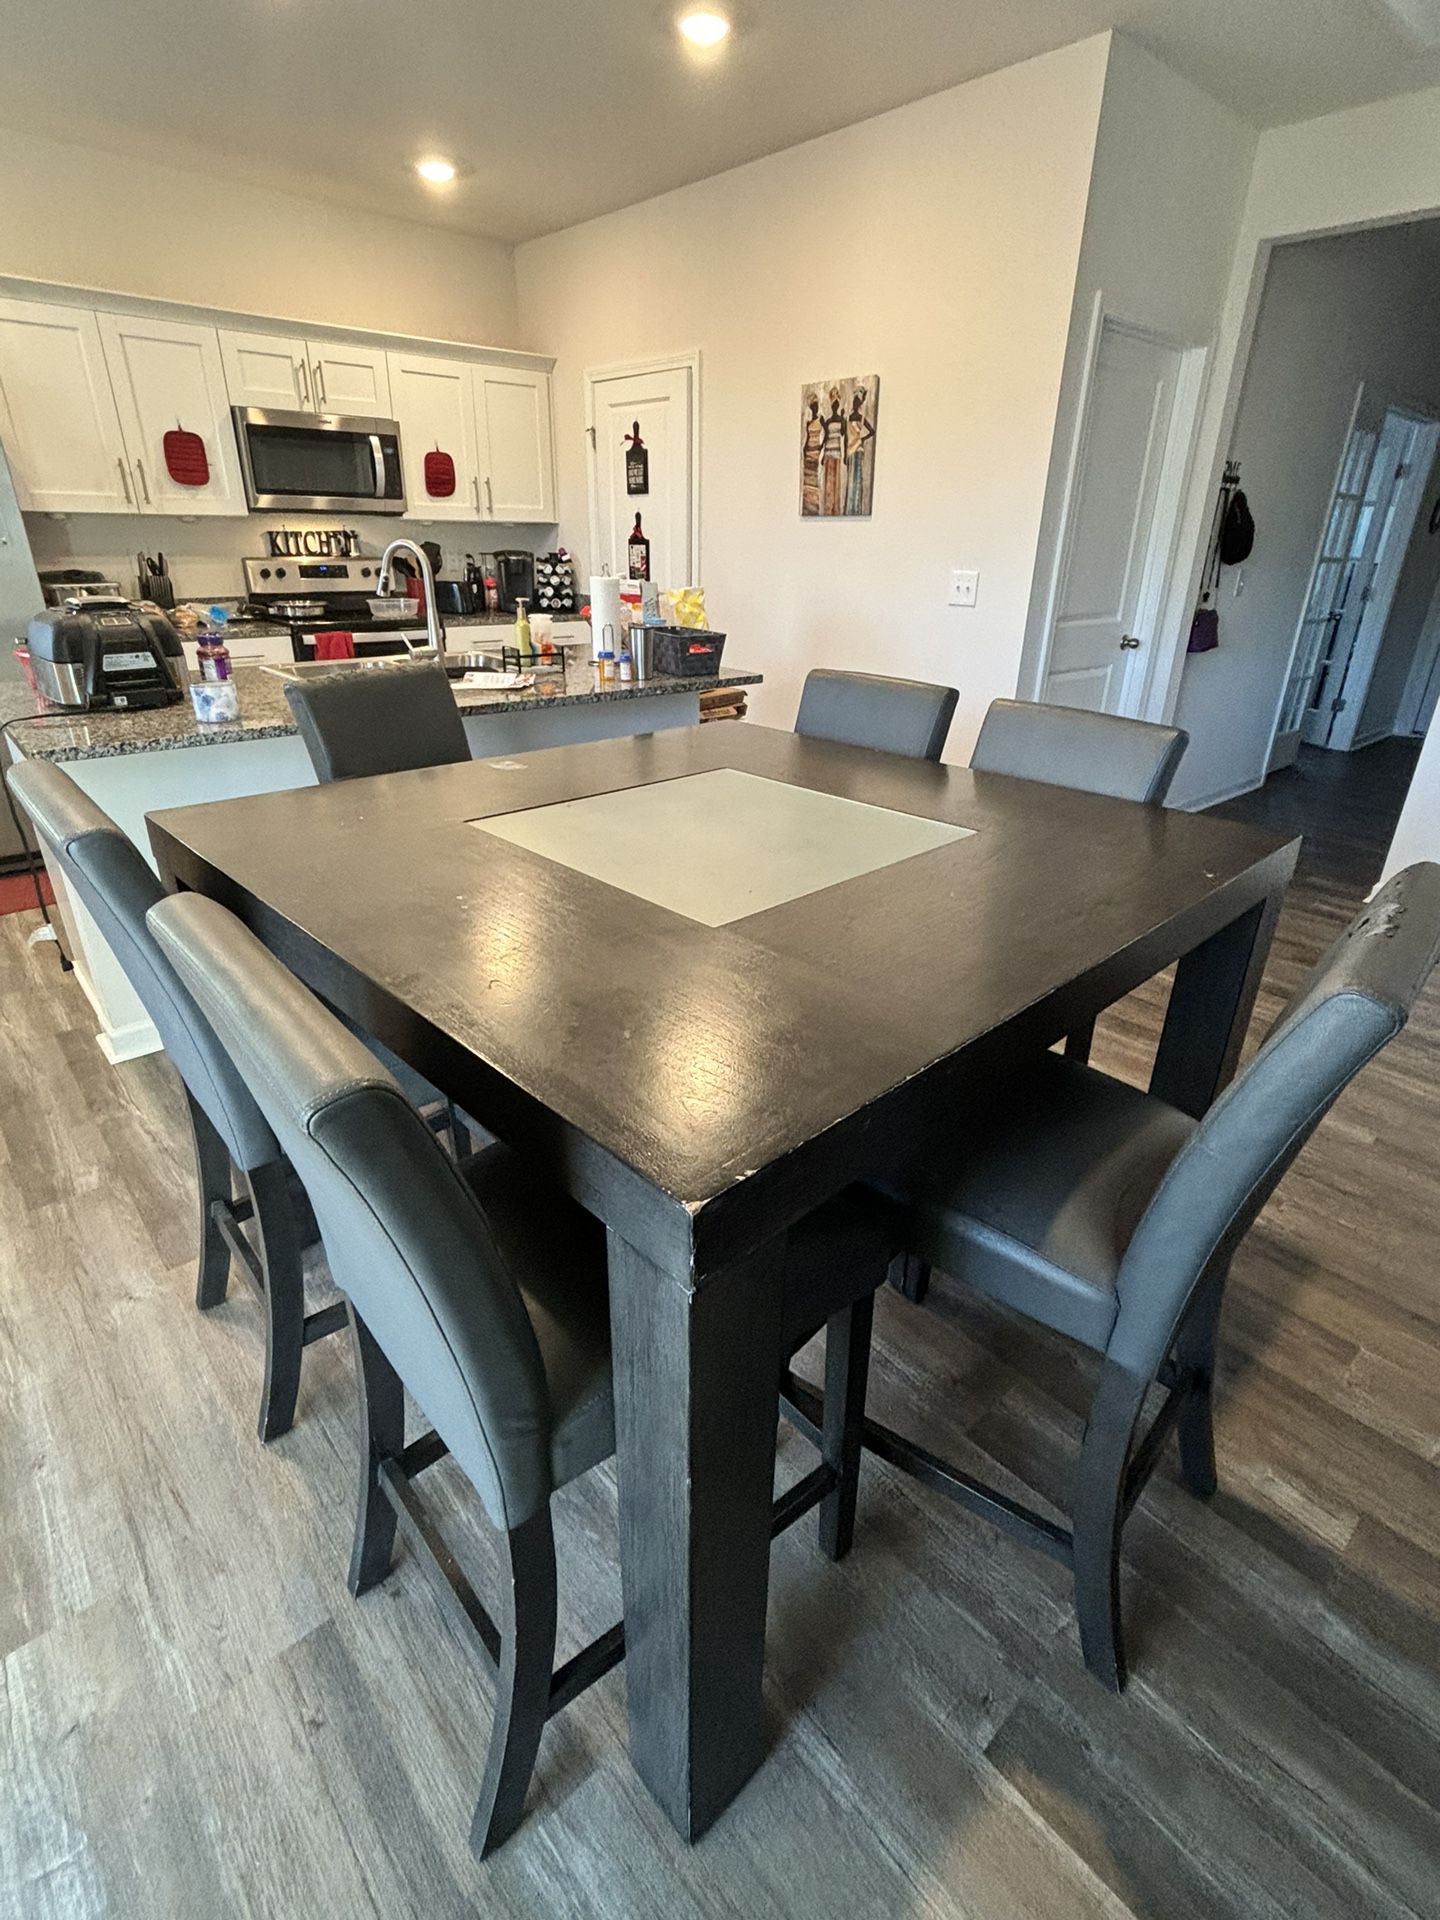 Dining room table/chairs